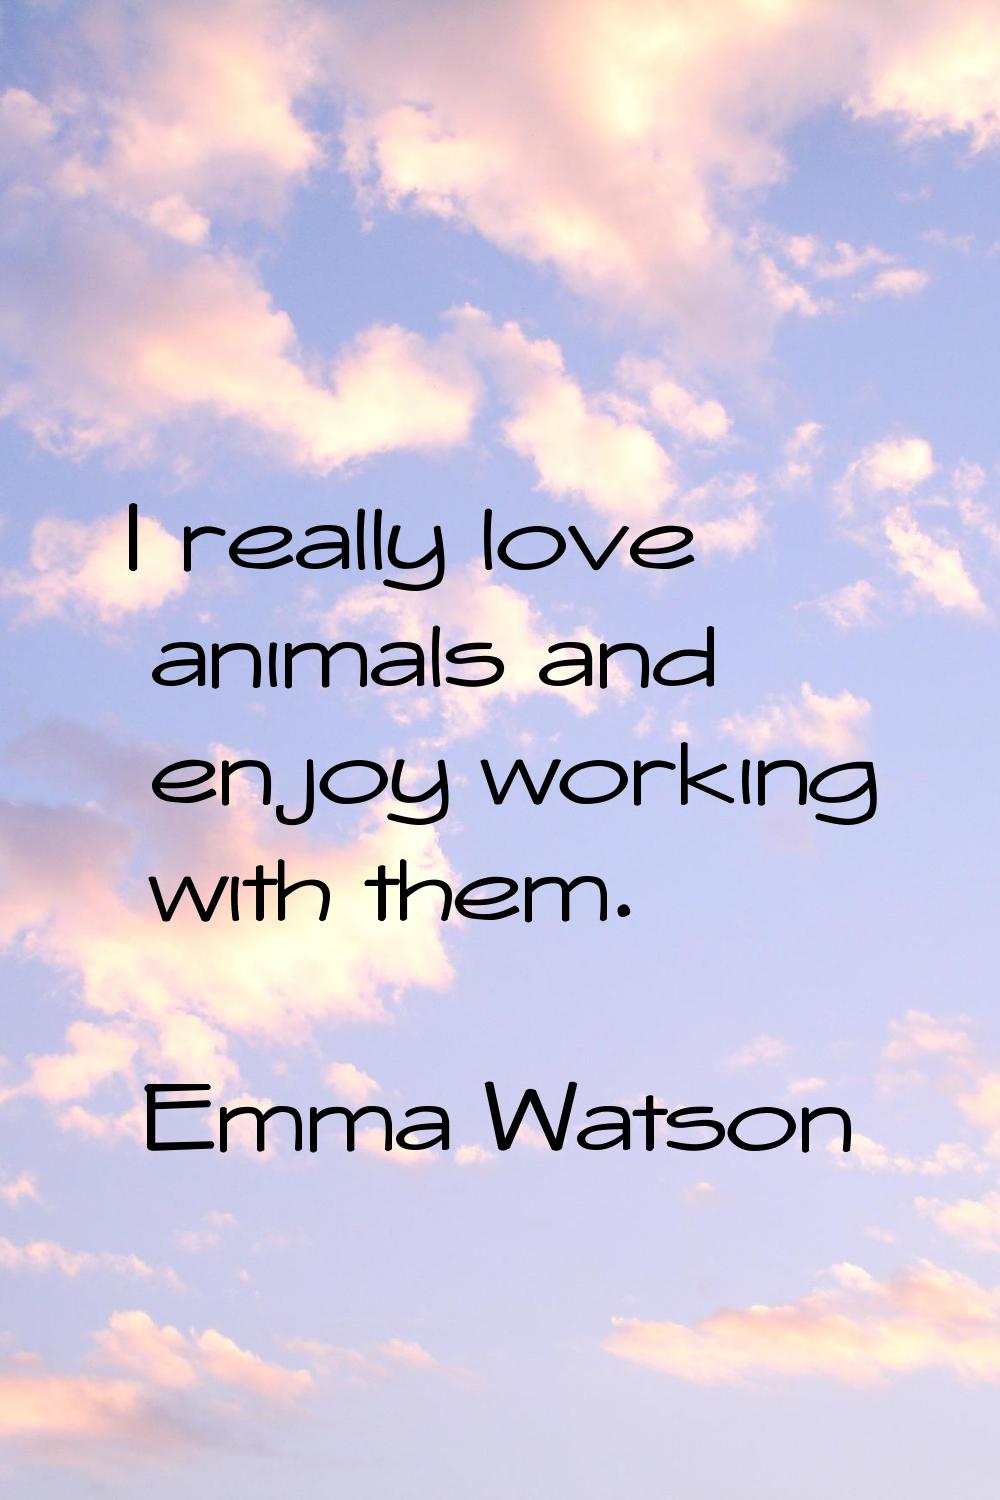 I really love animals and enjoy working with them.